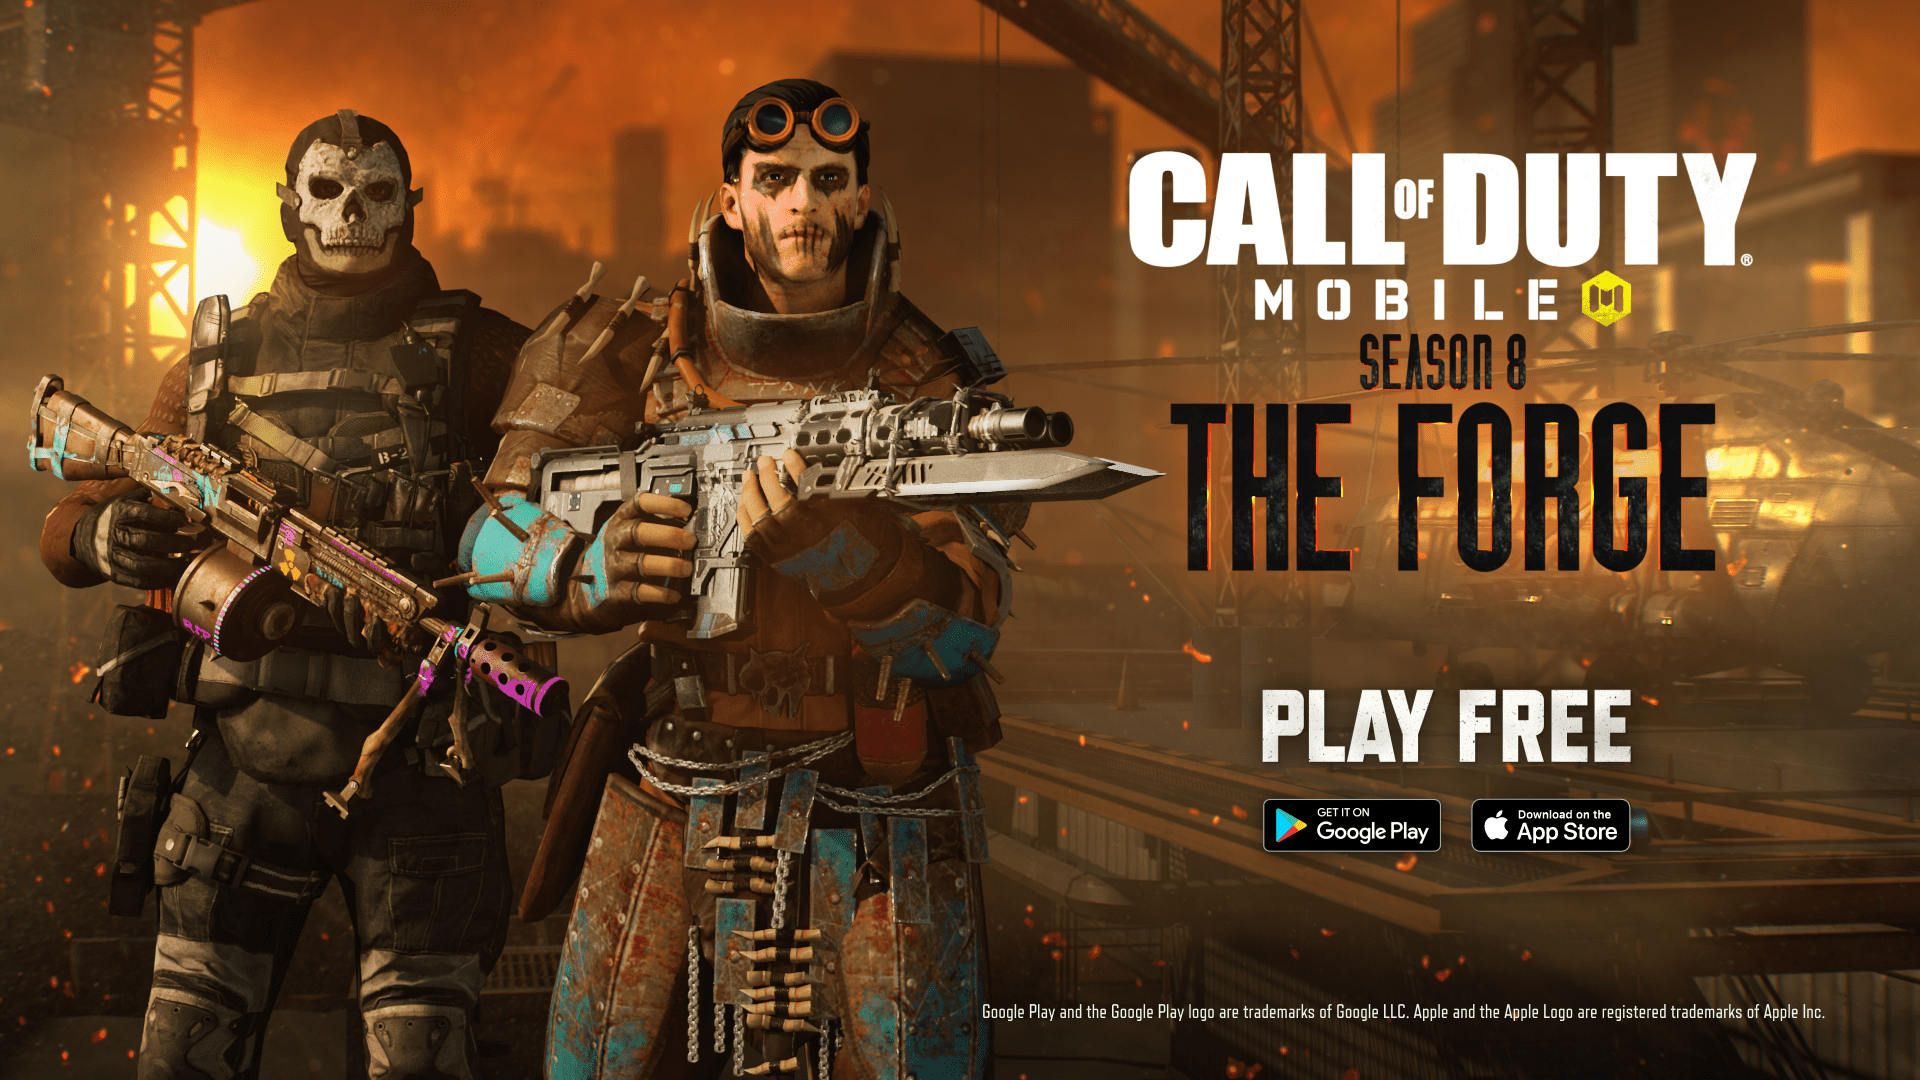 Call of Duty: Mobile Season 8: The Forge Now Live